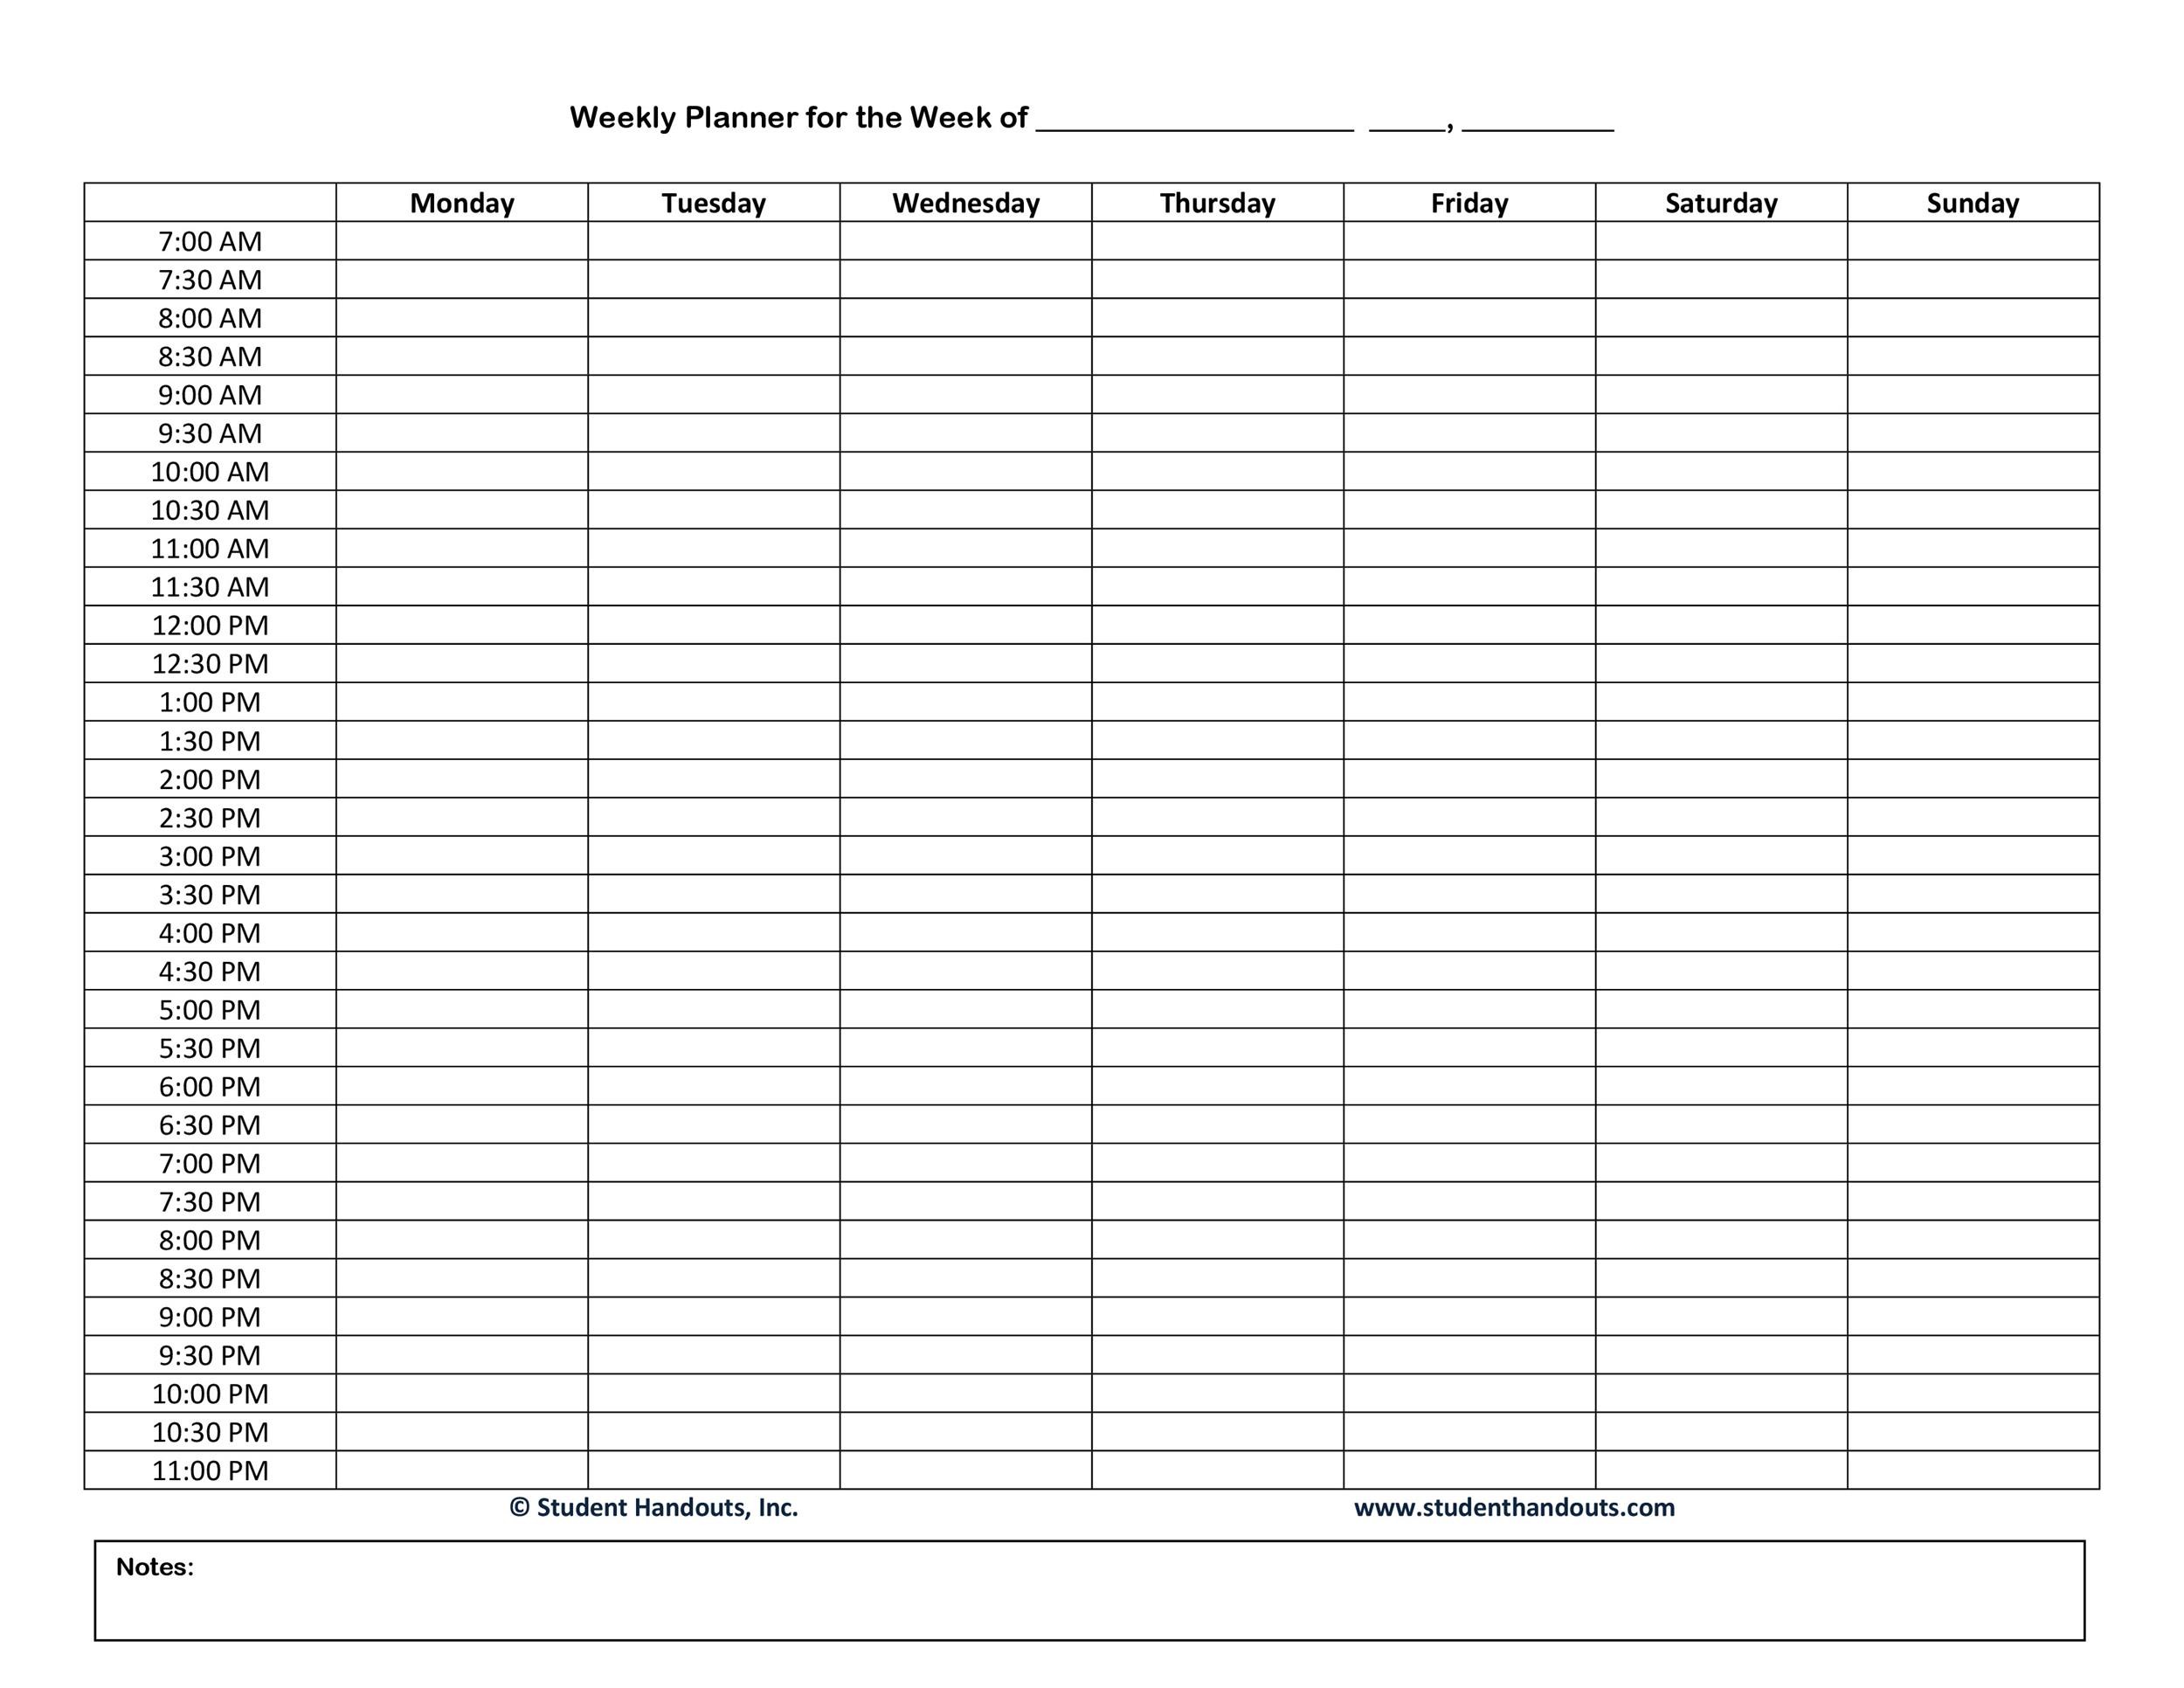 Daily Chart Template